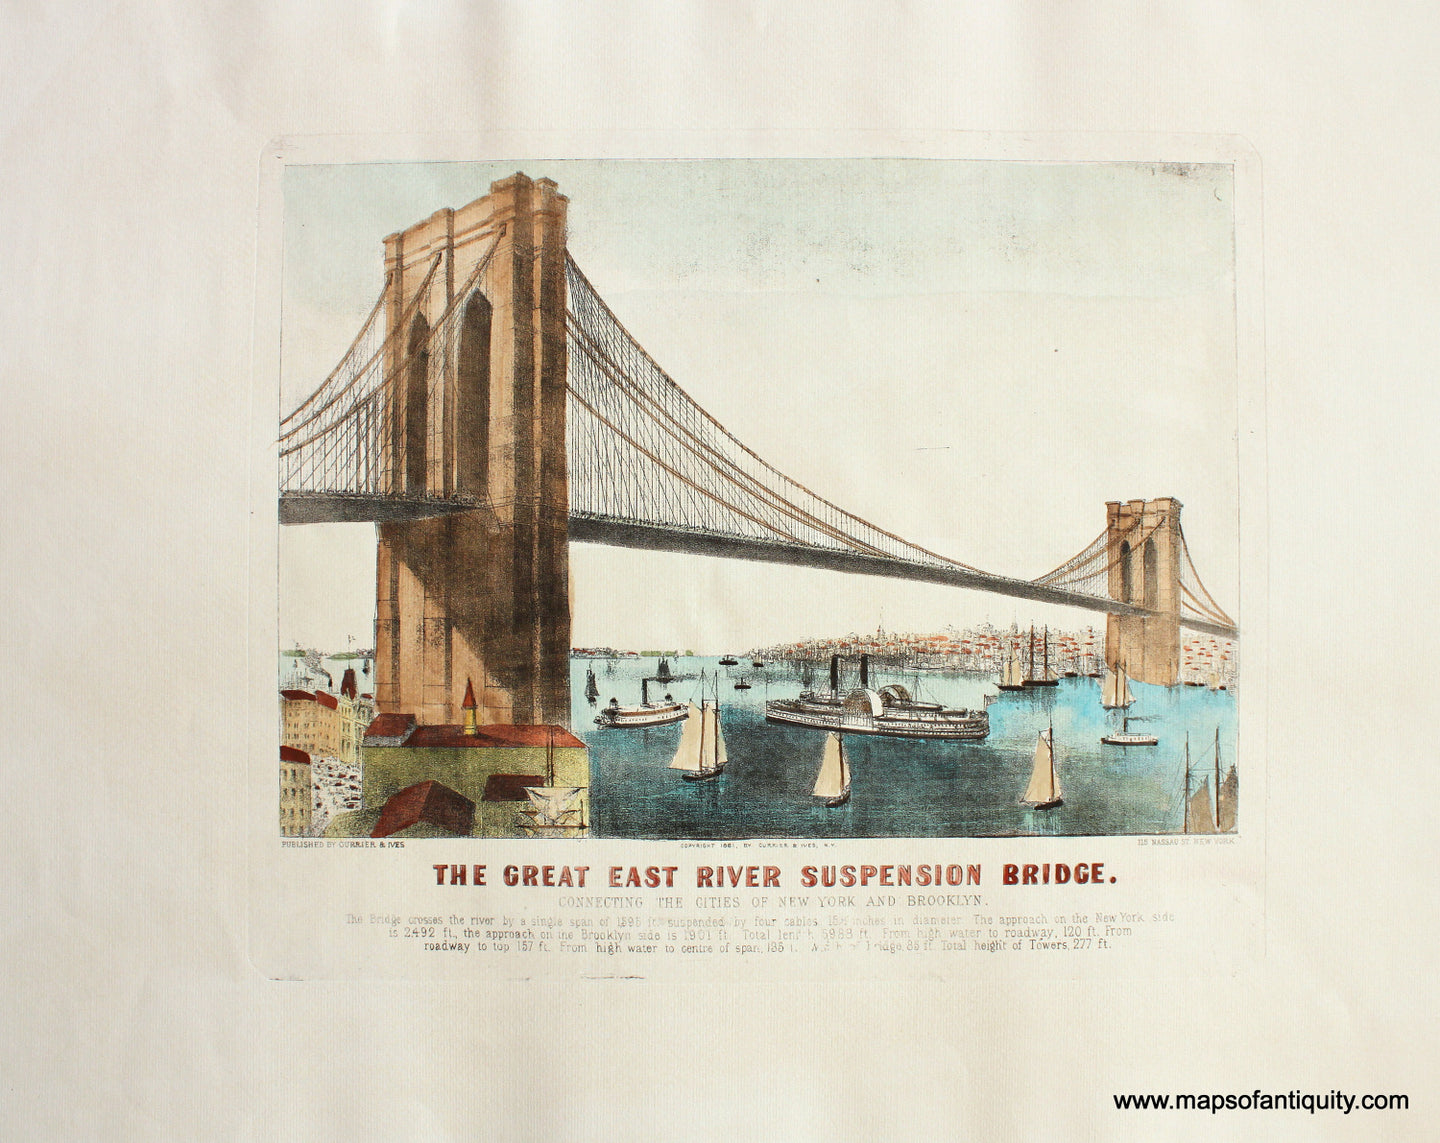 High-quality-Reproduction-The-Great-East-River-Suspension-Bridge---(Brooklyn-to-New-York-City)---Reproduction-Reproductions---Reproduction-Maps-Of-Antiquity